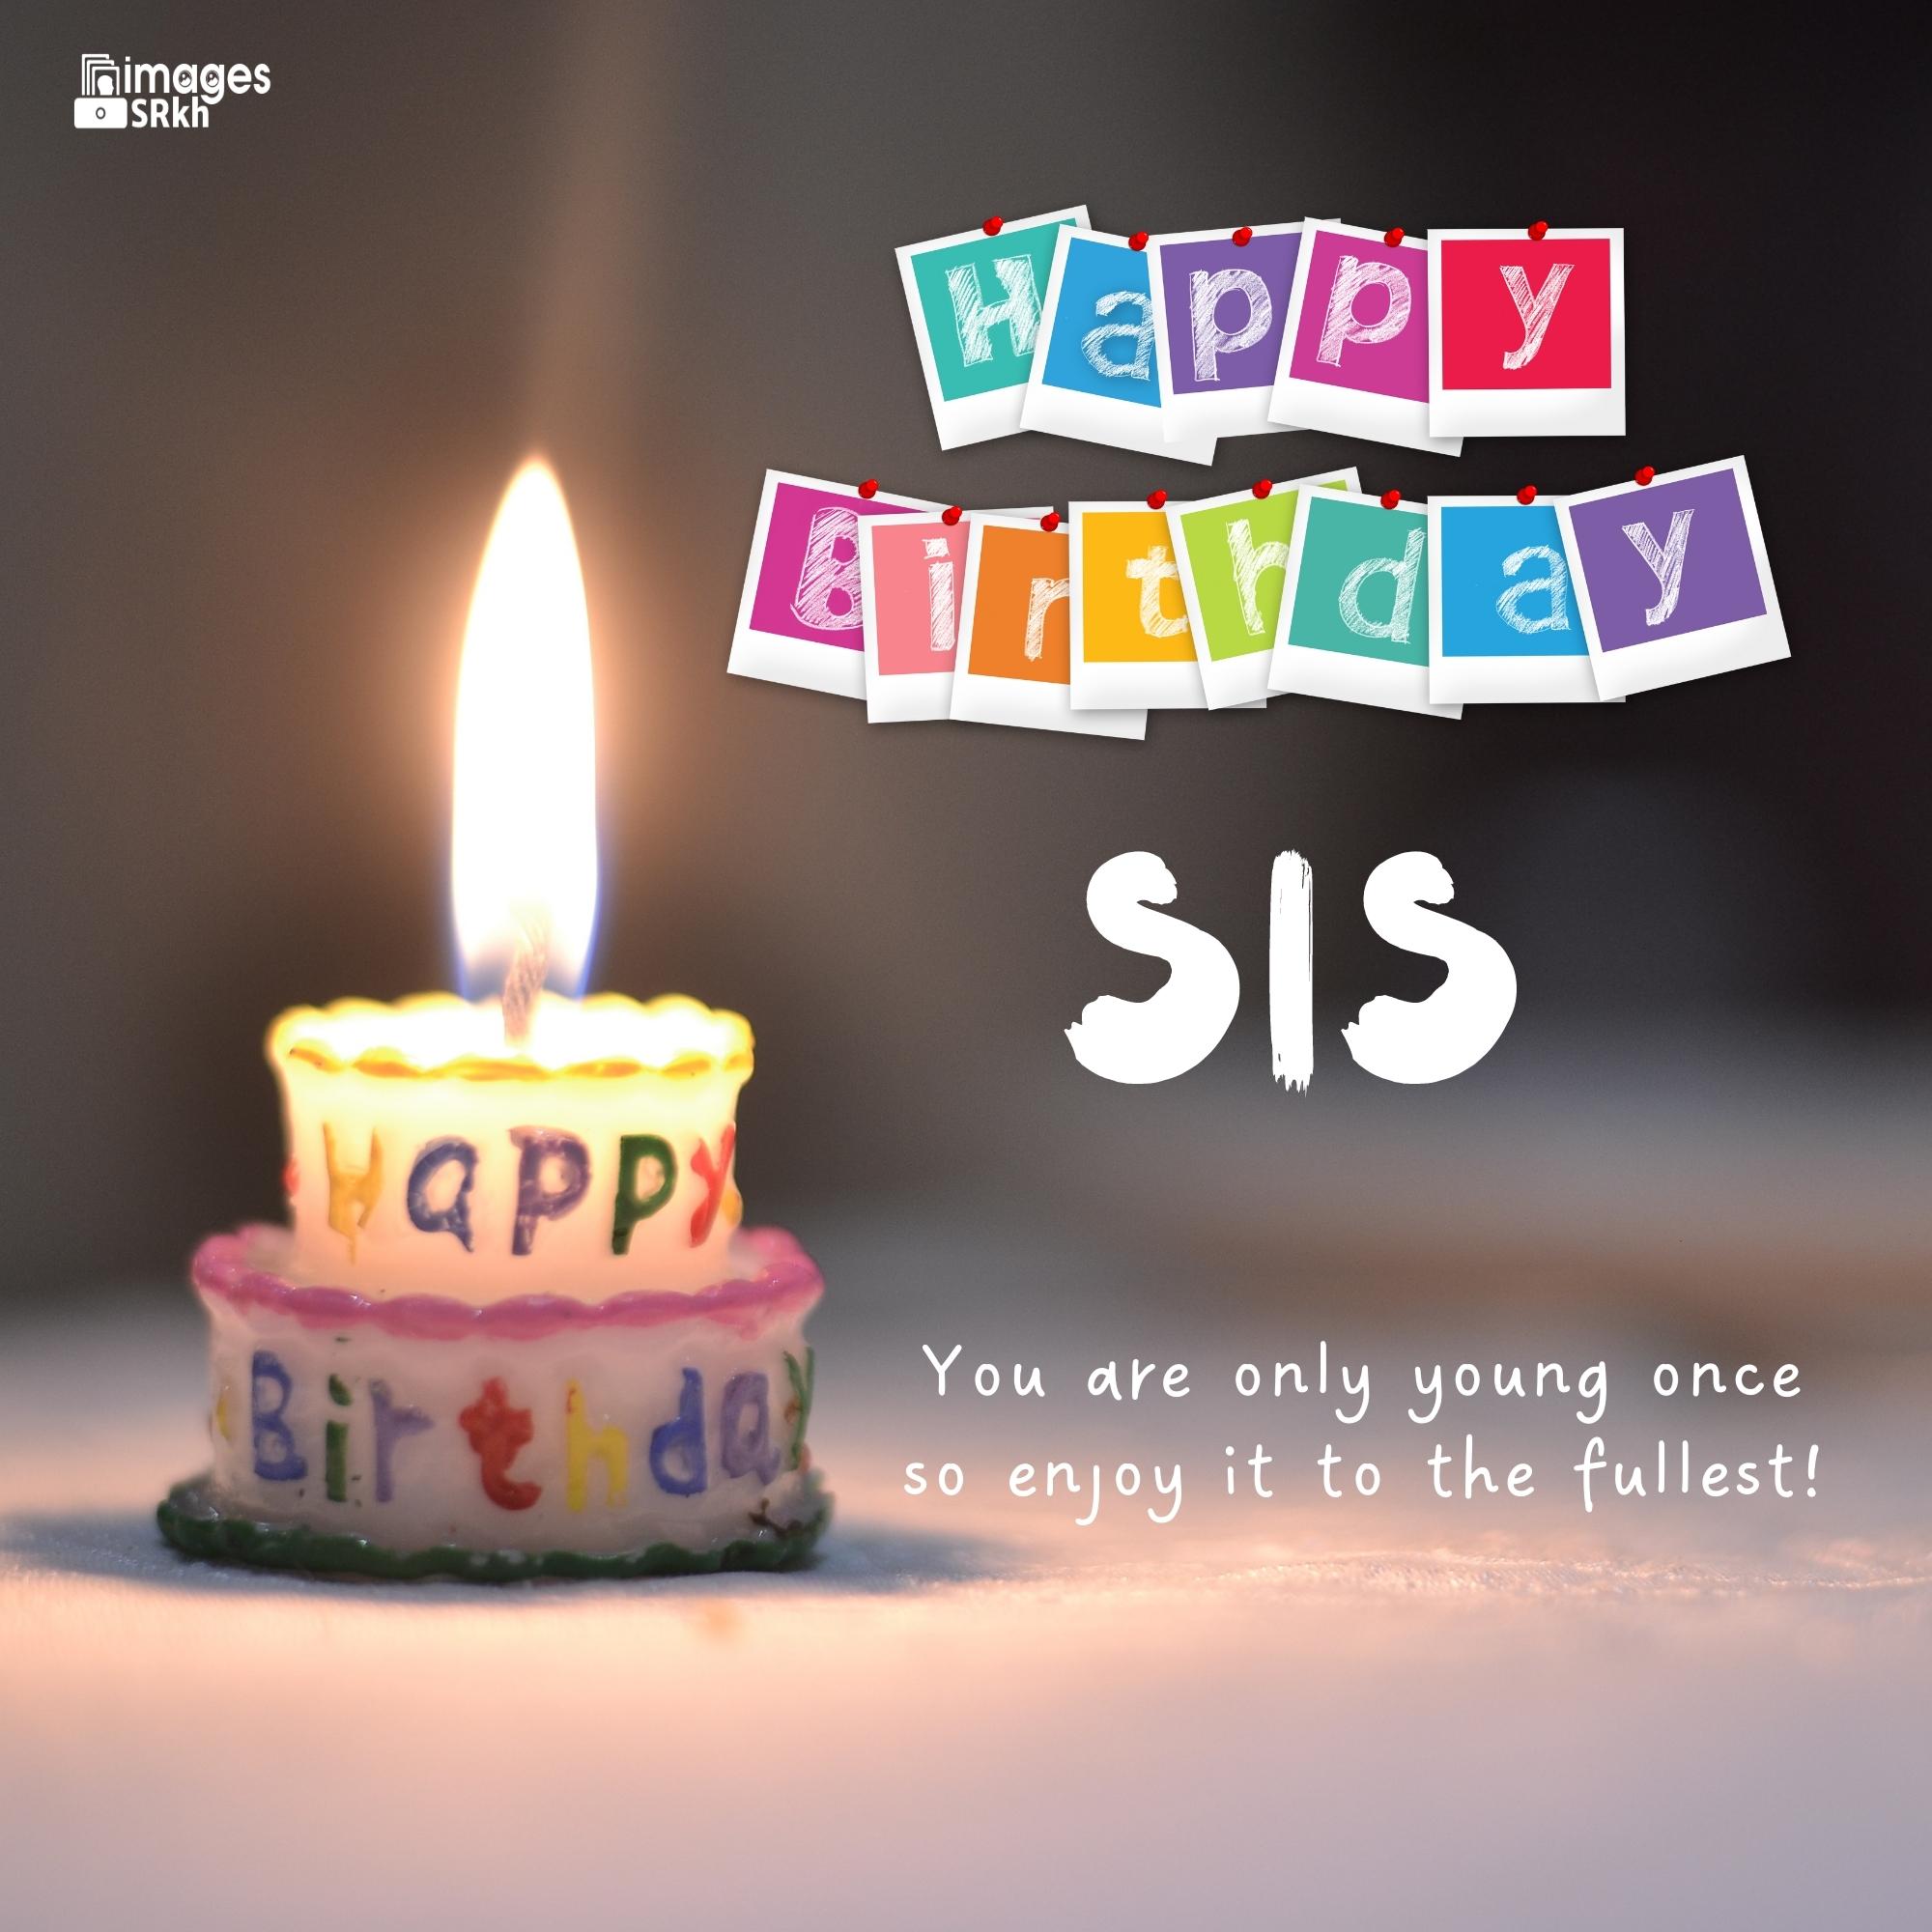 🔥 Happy Birthday Images Sis Download free - Images SRkh